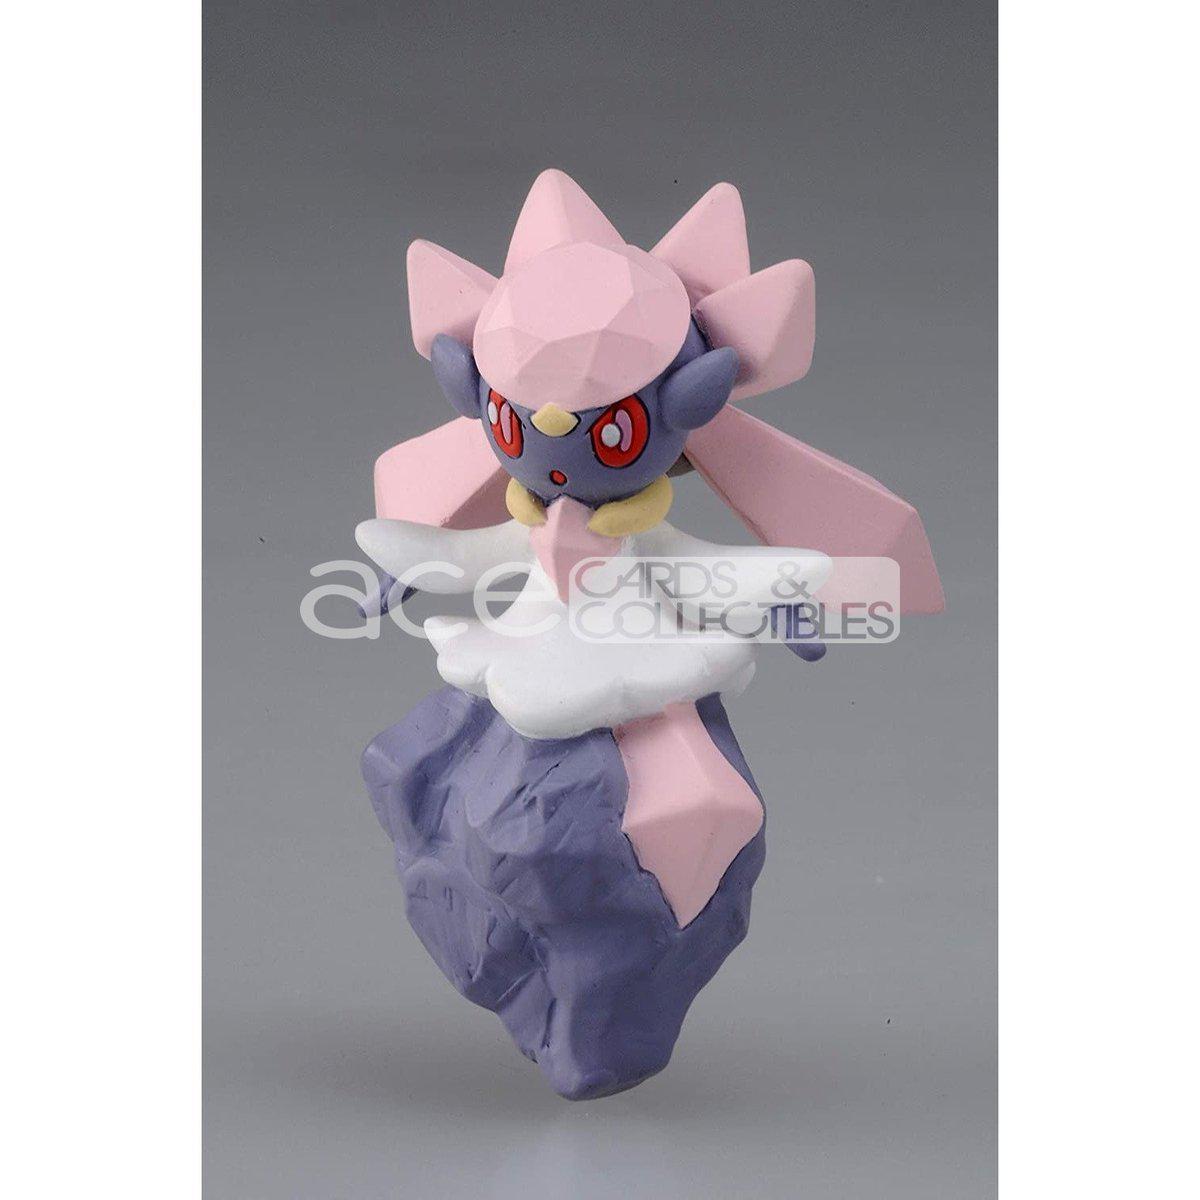 Pokemon Moncolle "Diancie" (MS-30)-Takara Tomy-Ace Cards & Collectibles